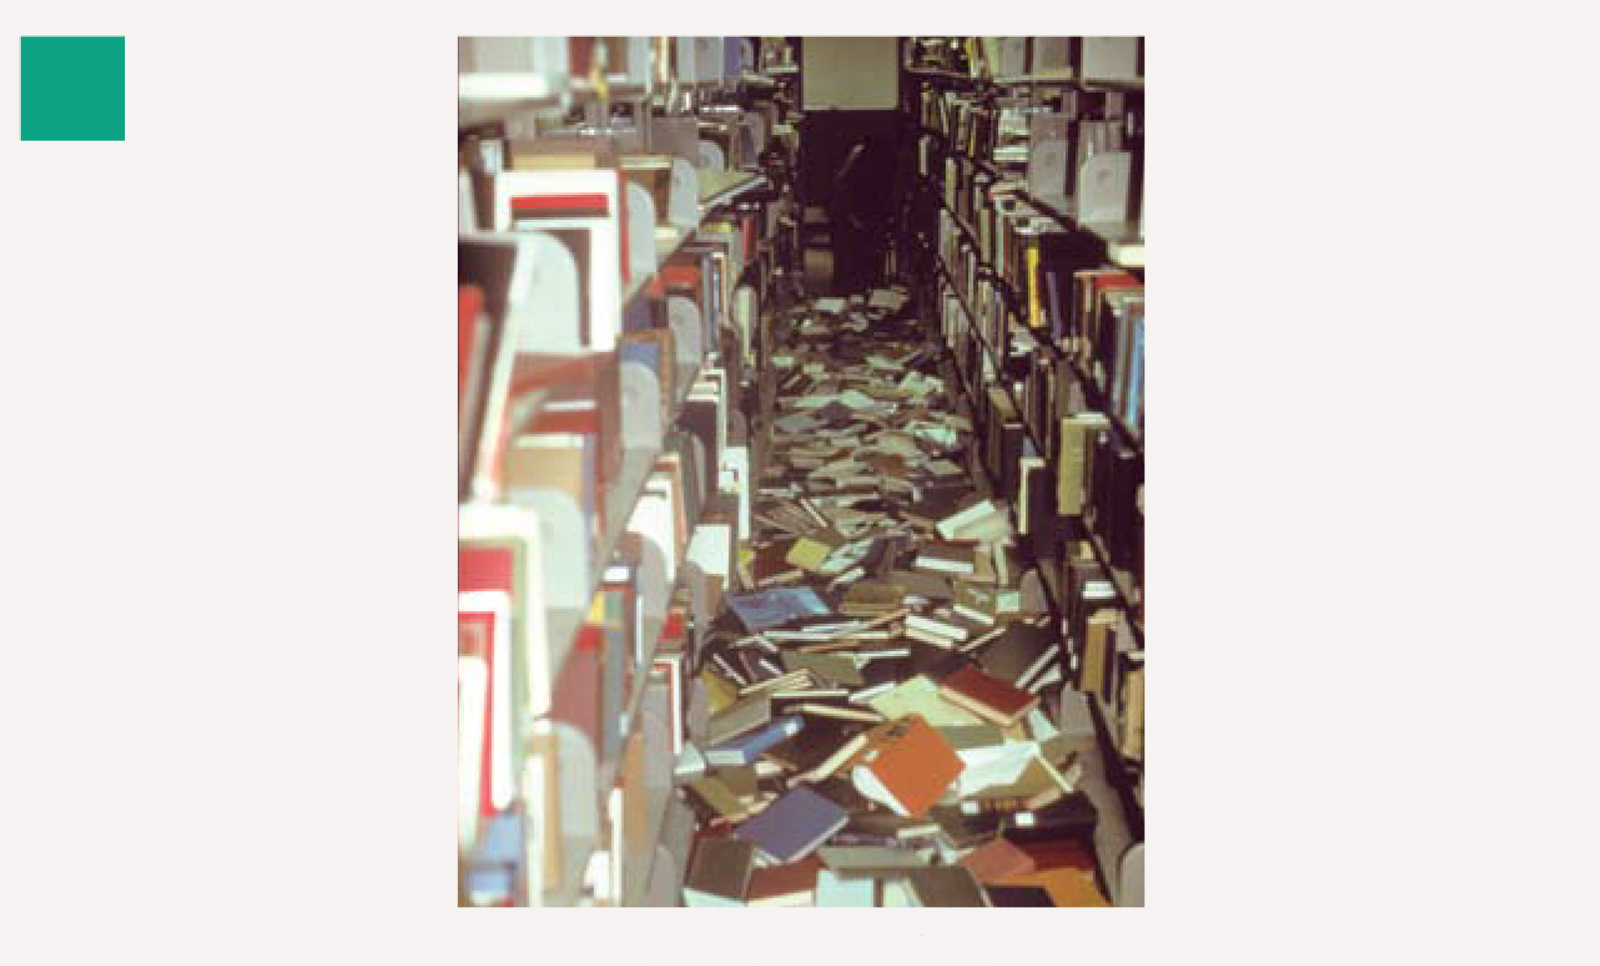 A photograph of toppled books at the University of California Santa Barbara Library in the aftermath of an earthquake on 13 August 1978.